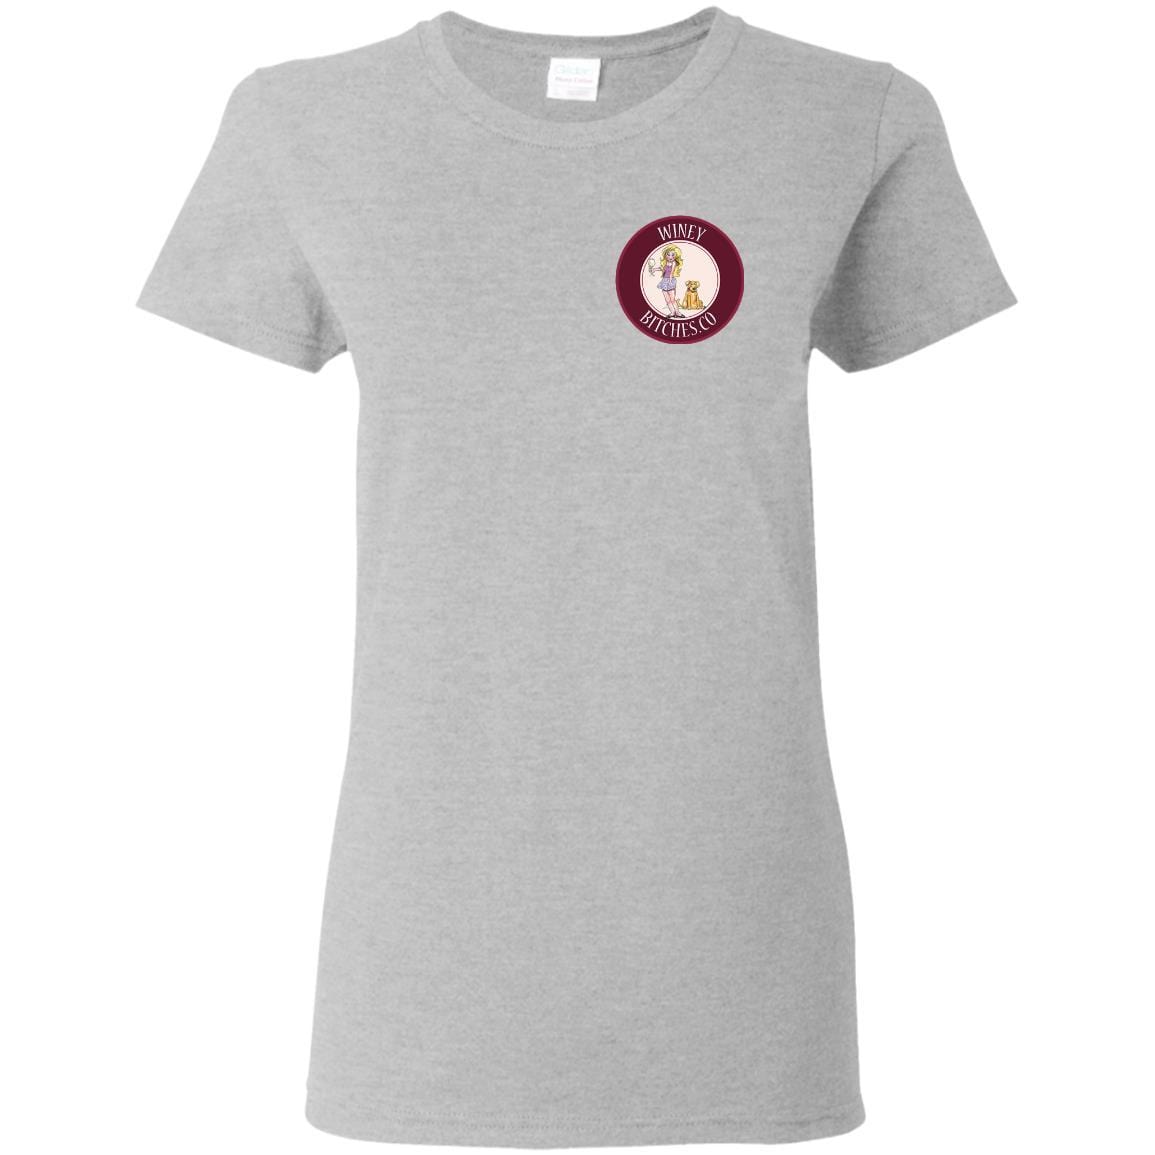 T-Shirts Sport Grey / S WineyBitches.co Hilariously Funny "Count Me In" Ladies T-Shirt for Wine & Dog Lovers WineyBitchesCo